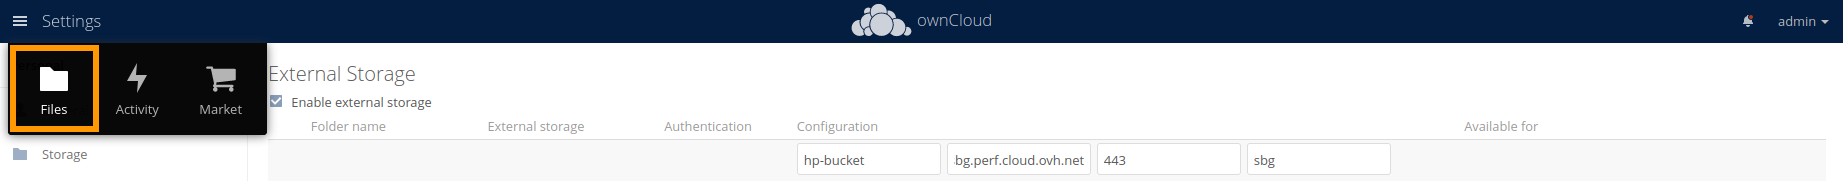 openioowncloud7.png